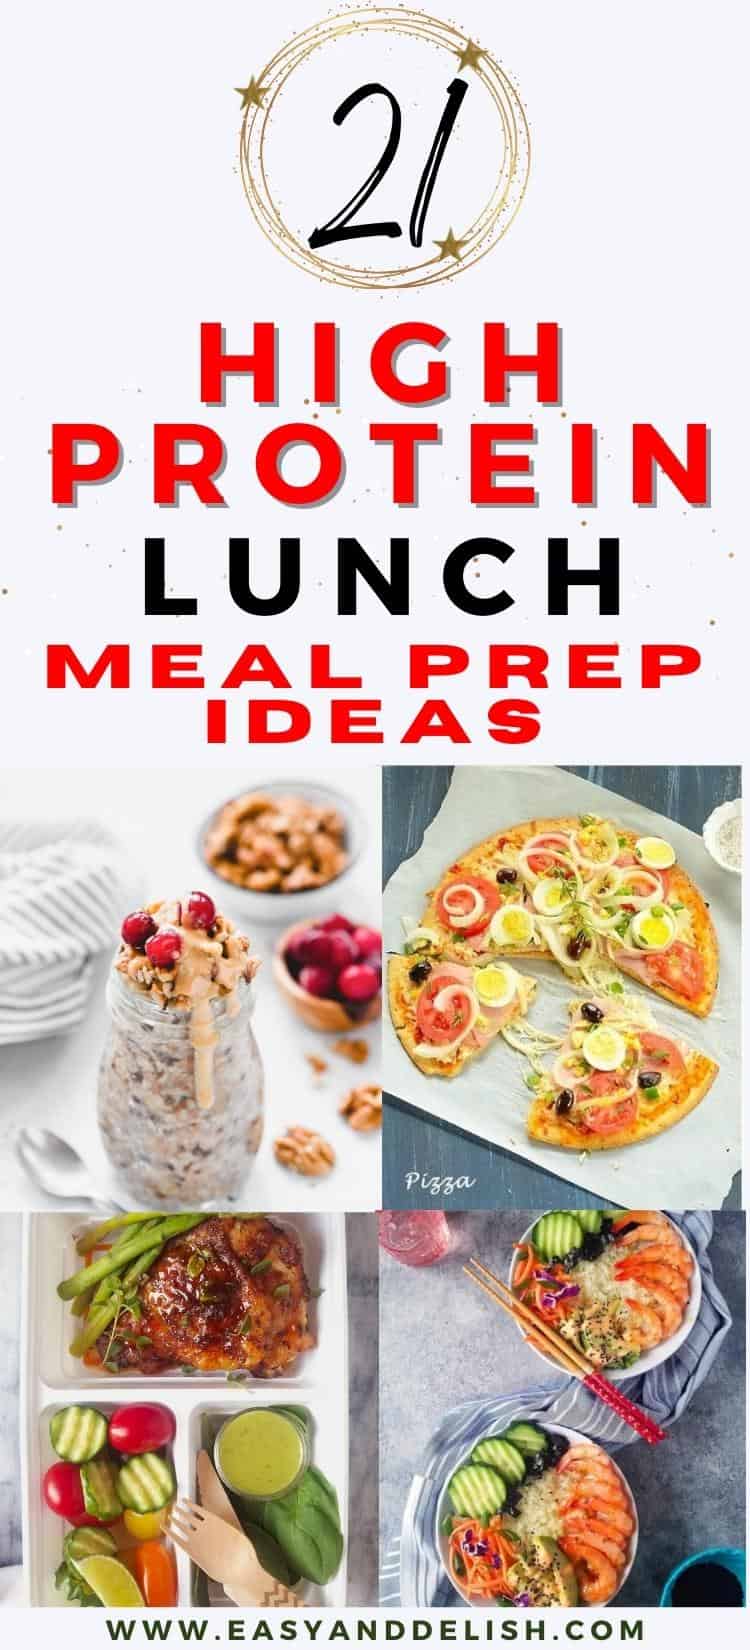 https://www.easyanddelish.com/wp-content/uploads/2022/07/HIGH-PROTEIN-LUNCH-MEAL-PREP-IDEAS-PIN.jpg